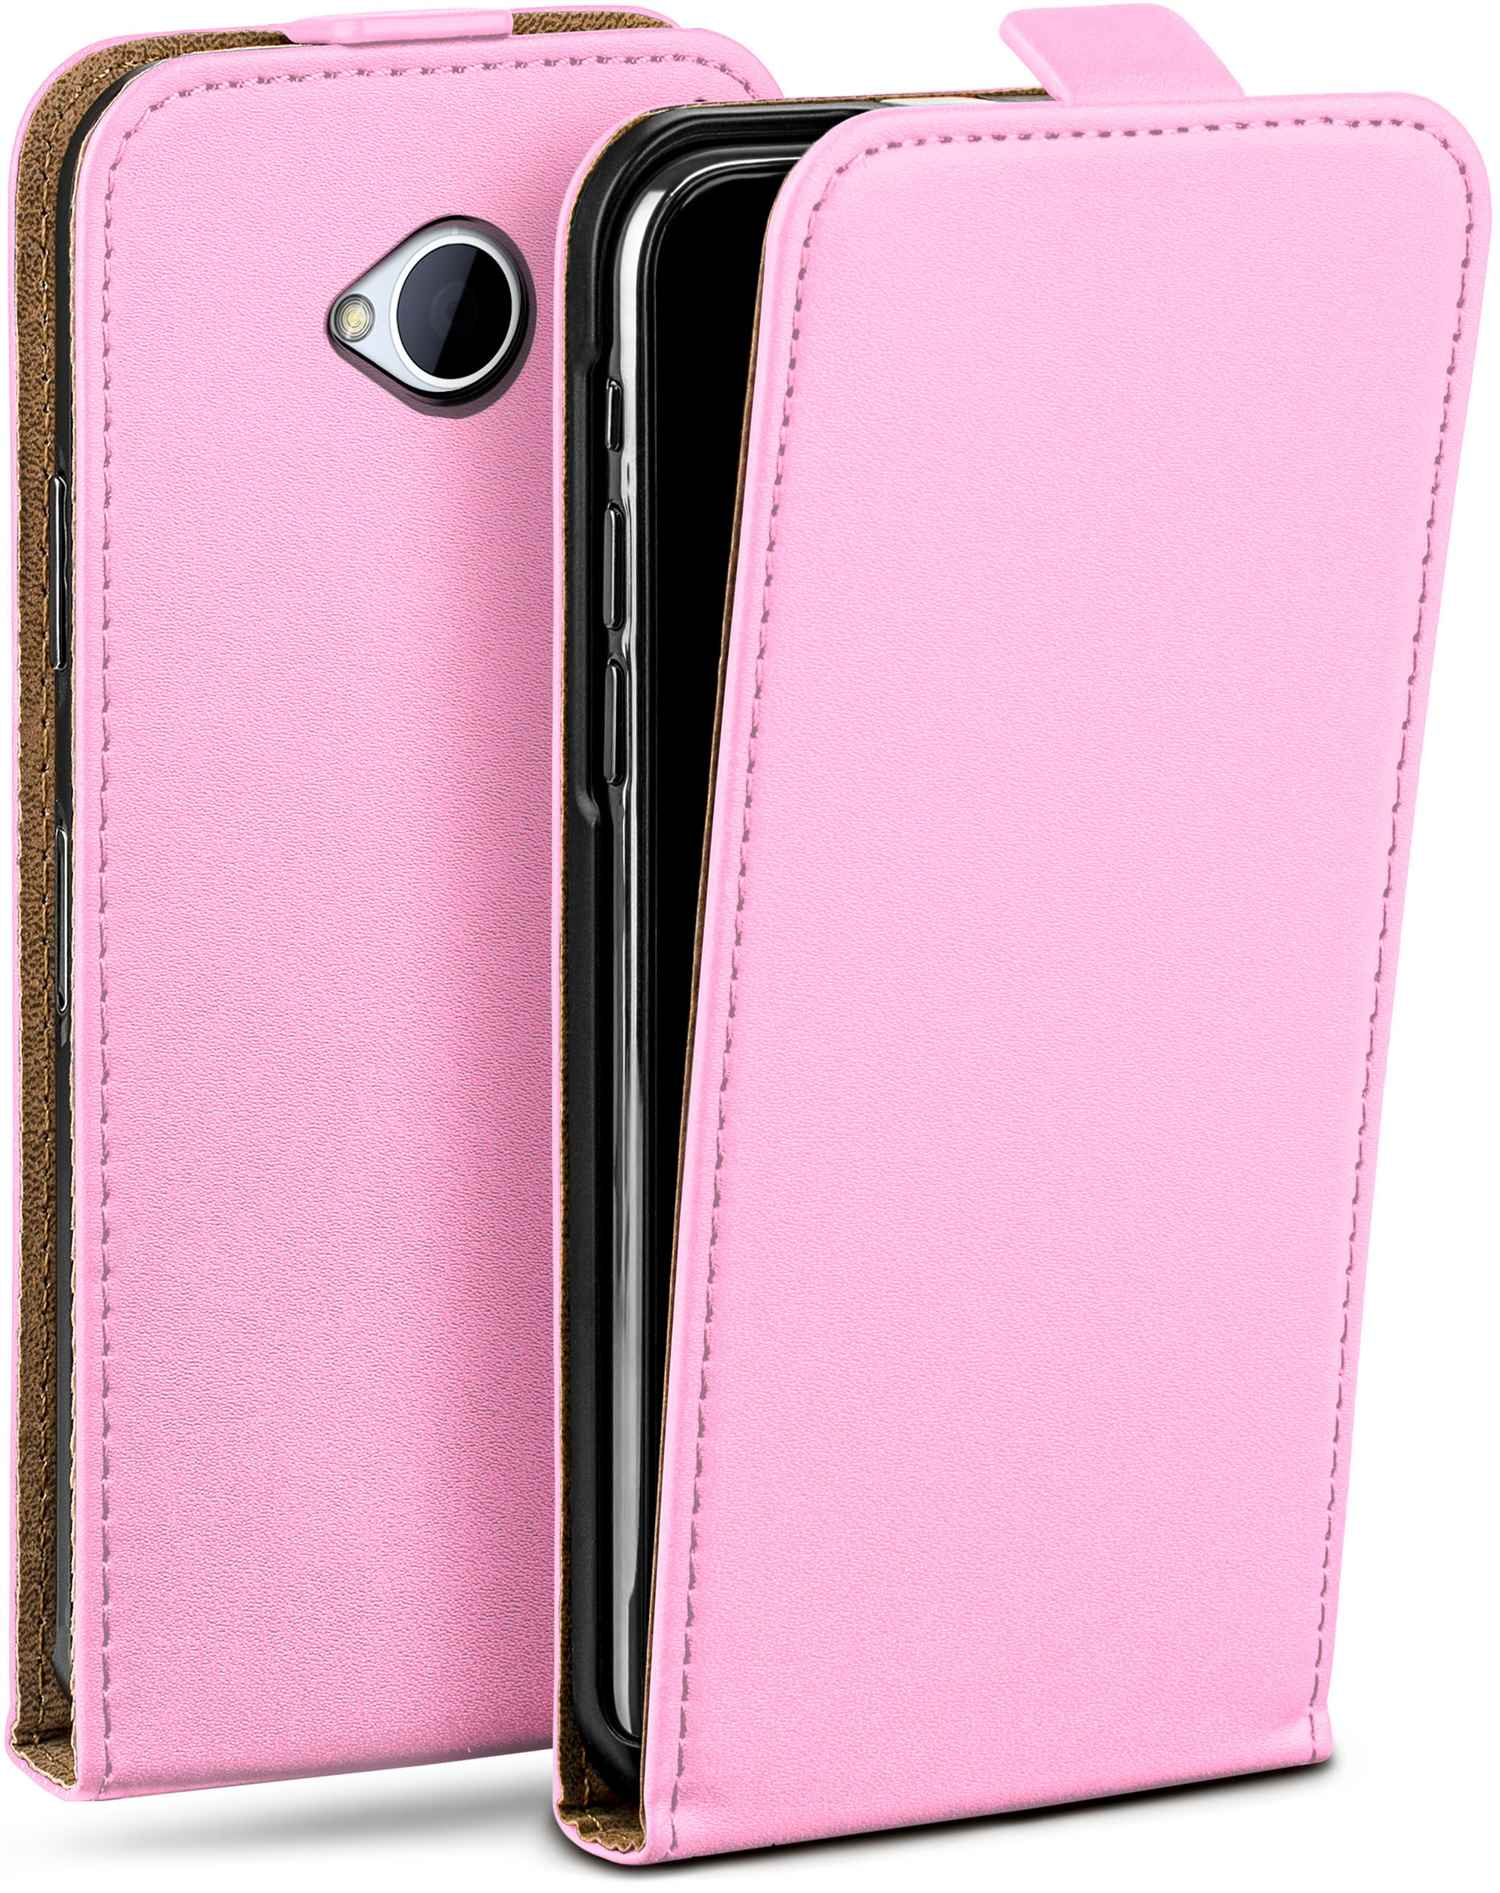 HTC, One Flip Case, Flip MOEX Cover, Icy-Pink M7,